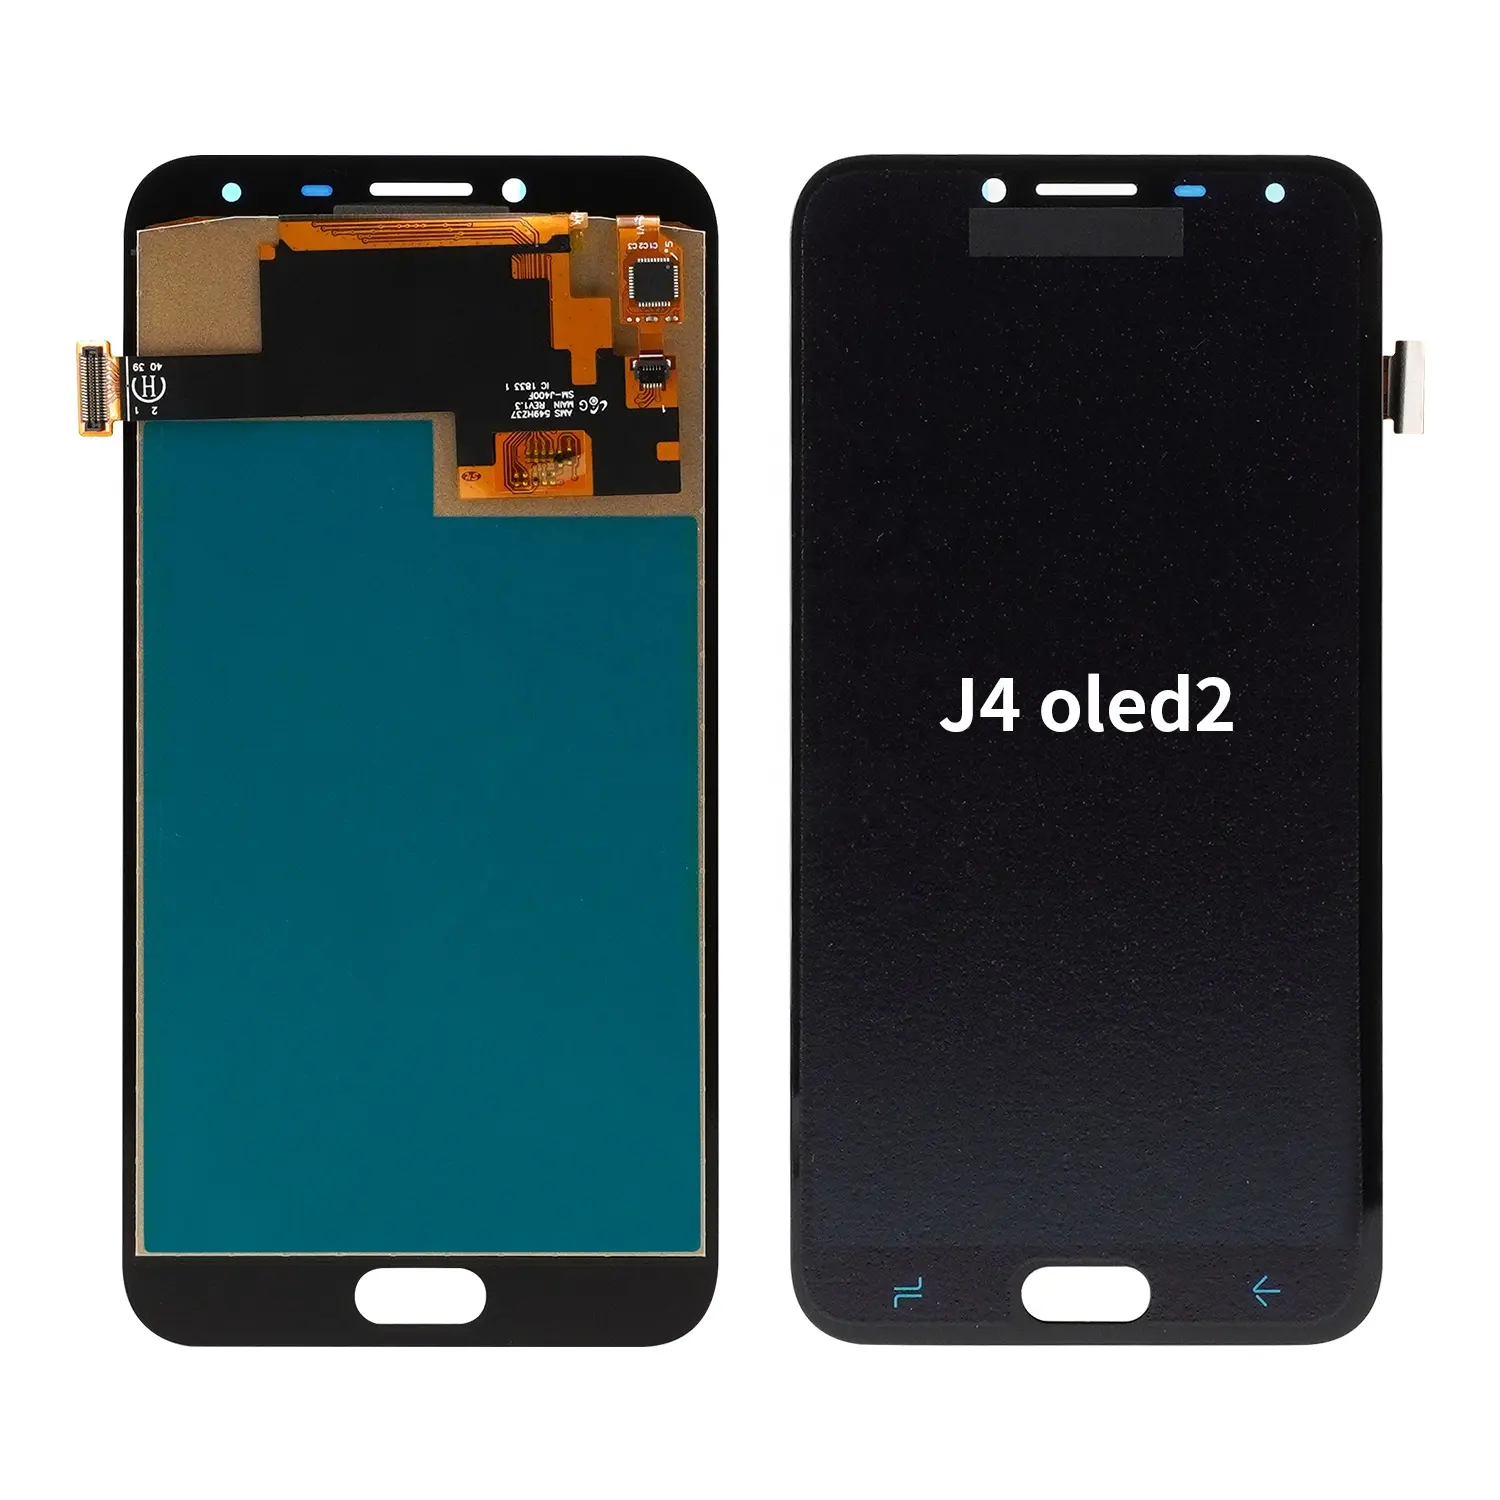 Factory Price Phone J4 tested Lcd Screen Replacement 6 inches Screen Digitizer Assembly for Samsung J4 OLED2 Original Display